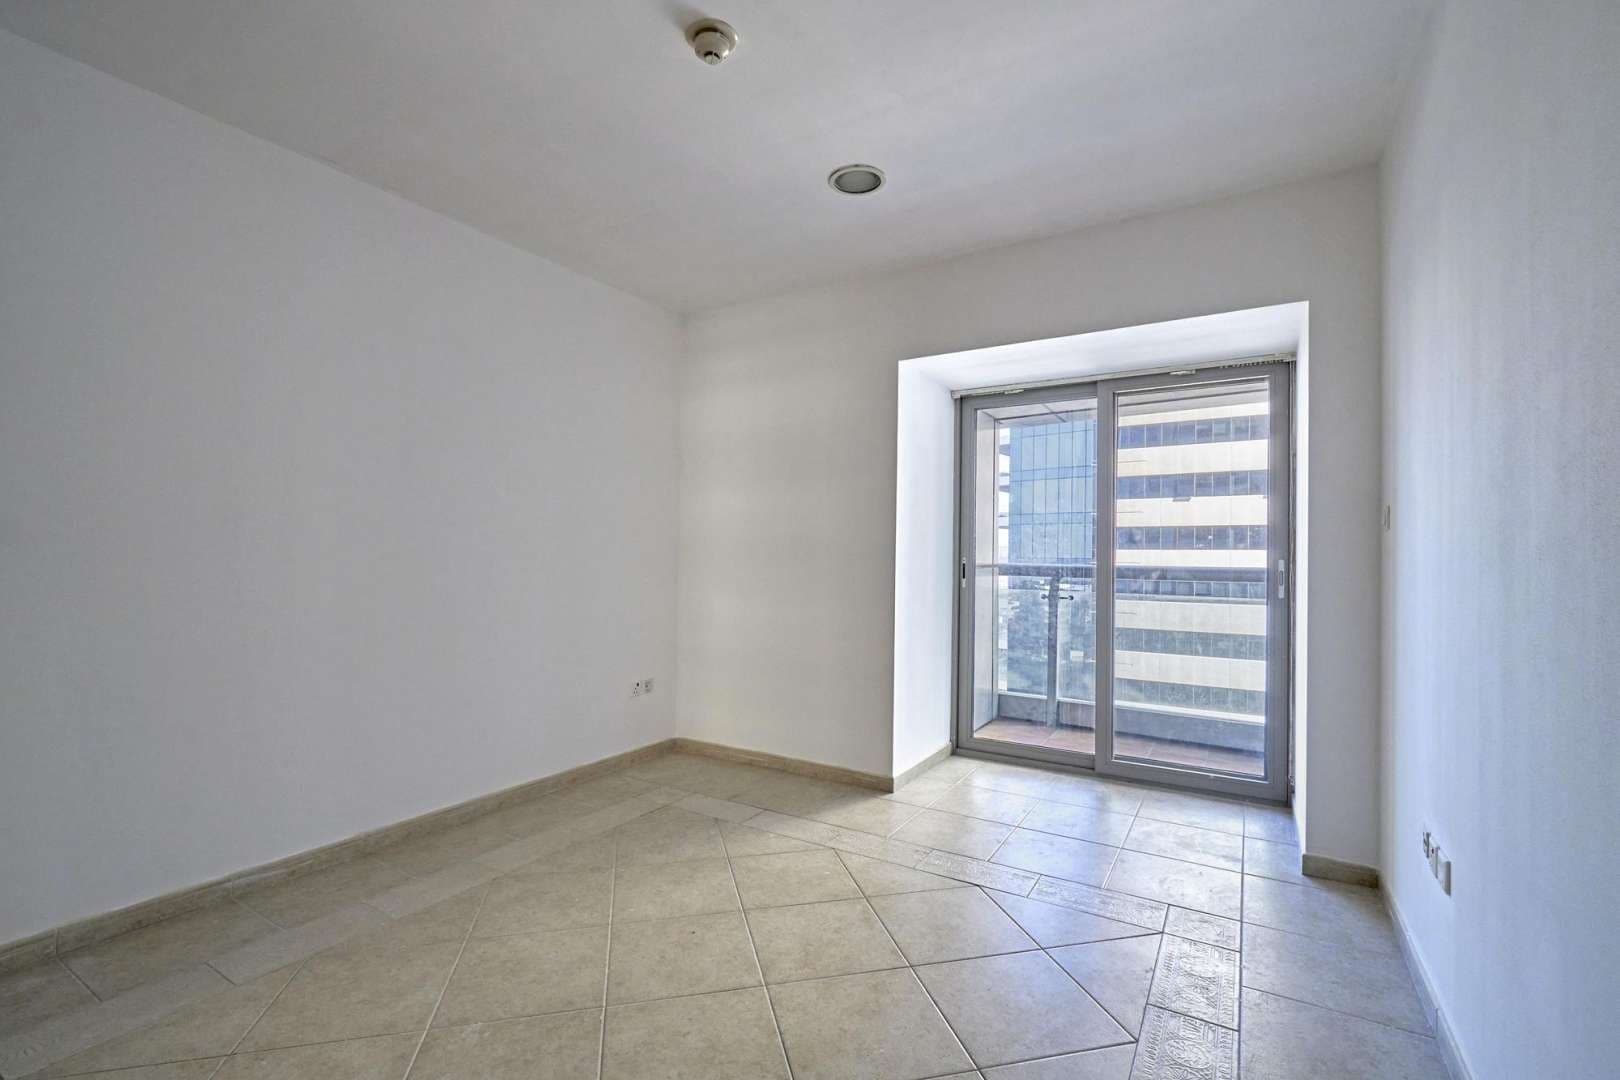 1 Bedroom Apartment For Rent Princess Tower Lp05742 226a484cd2f91000.jpg